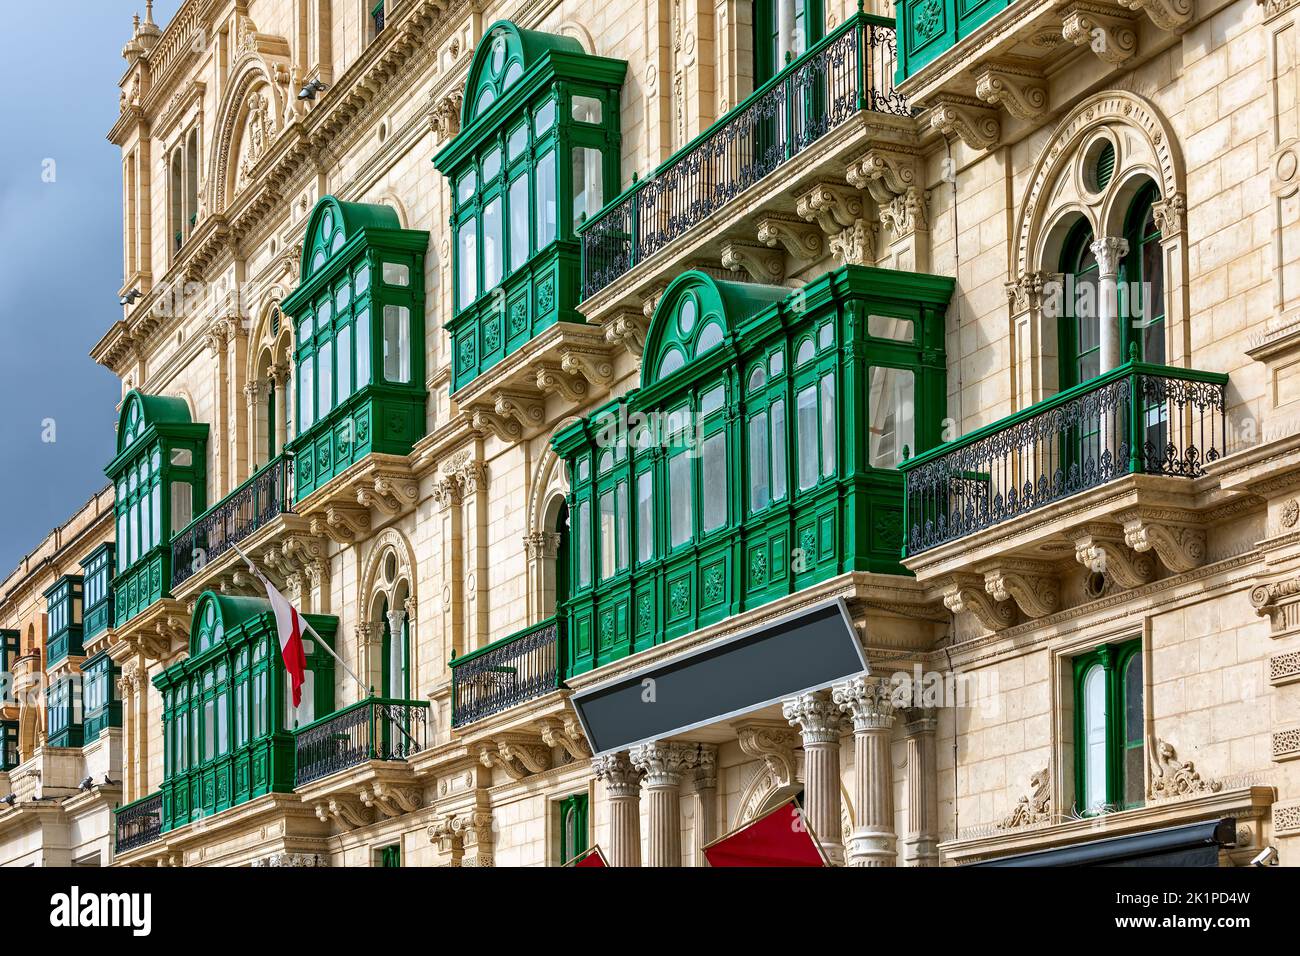 Fragment of the building's facade with traditional wooden ornate balconies painted in green in Valletta, Malta. Stock Photo